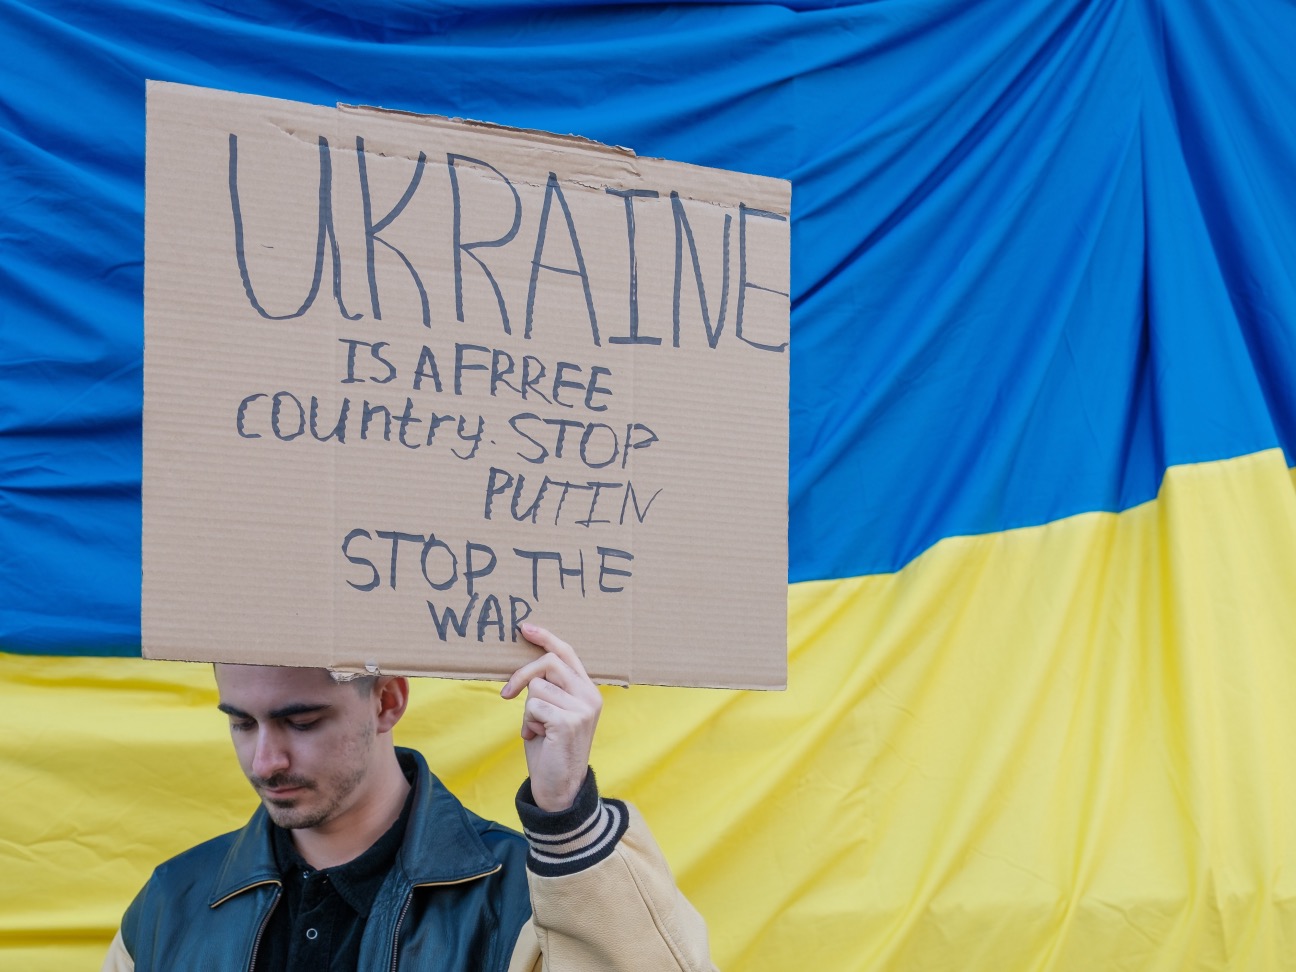 We are devastated by the events in Ukraine. Here are some helpful tips how you can help Ukrainians